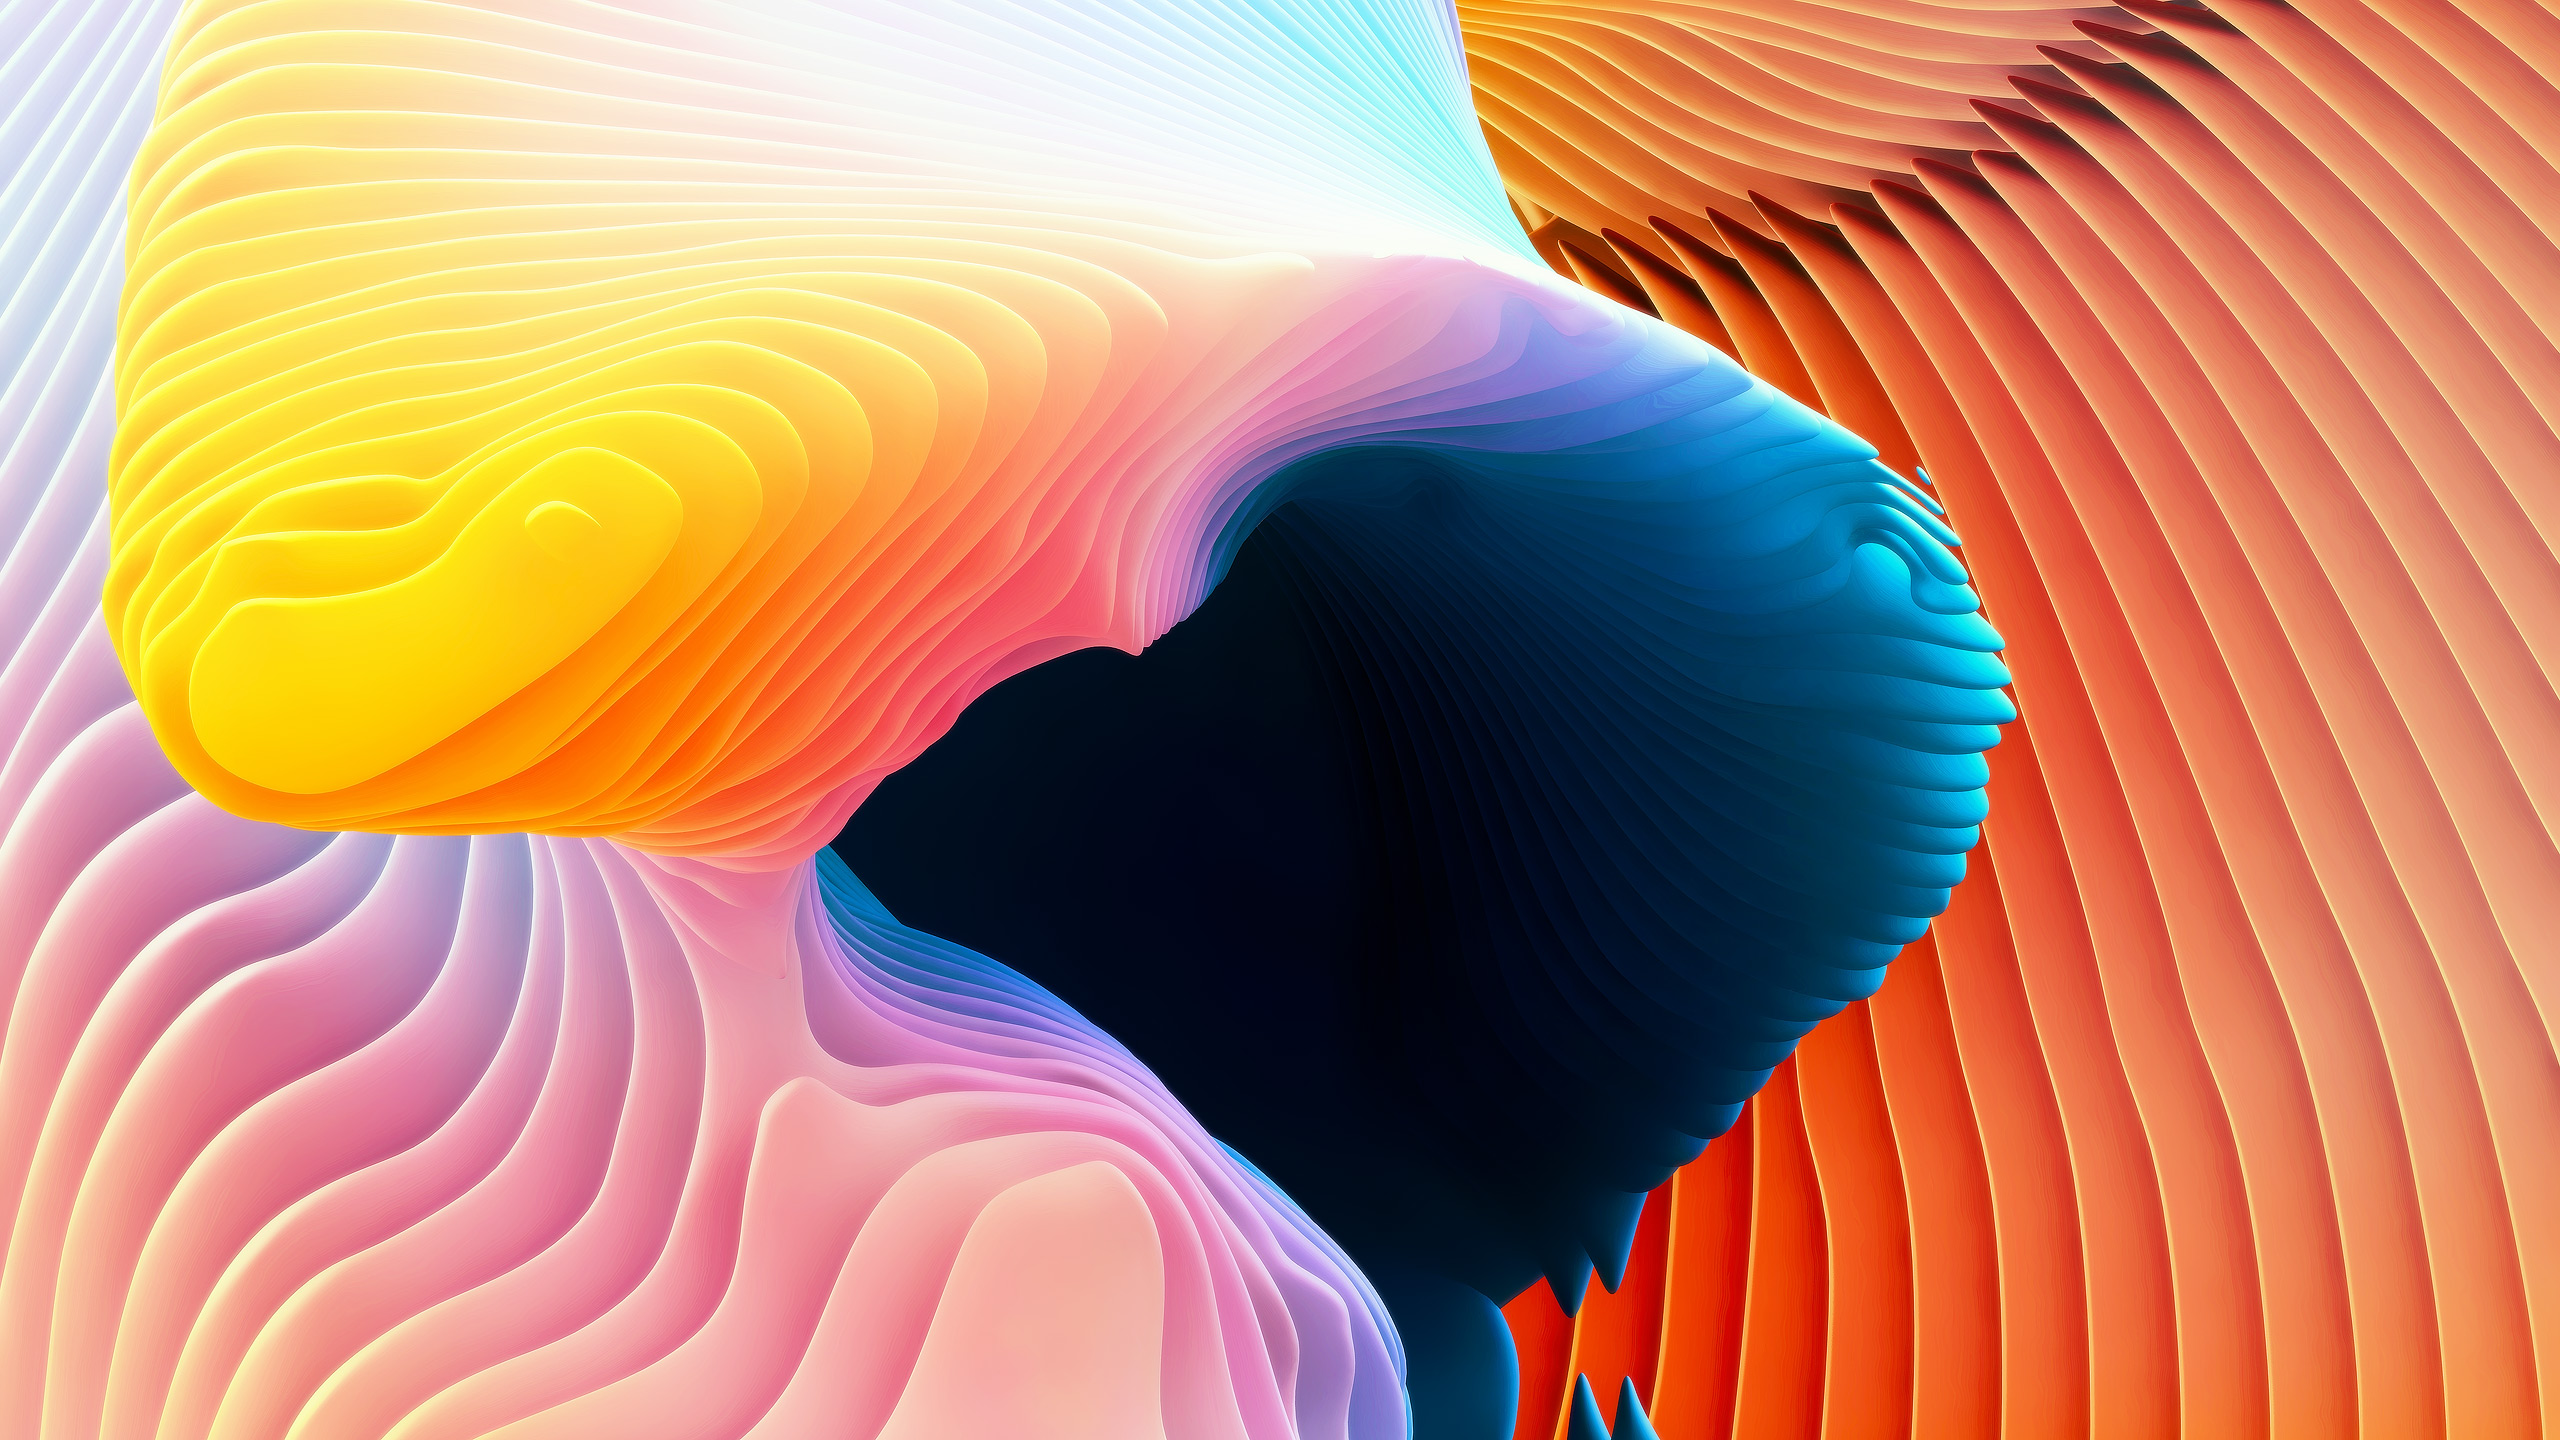 Ari Weinkle Abstract Spiral Colorful Digital Art 2560x1440